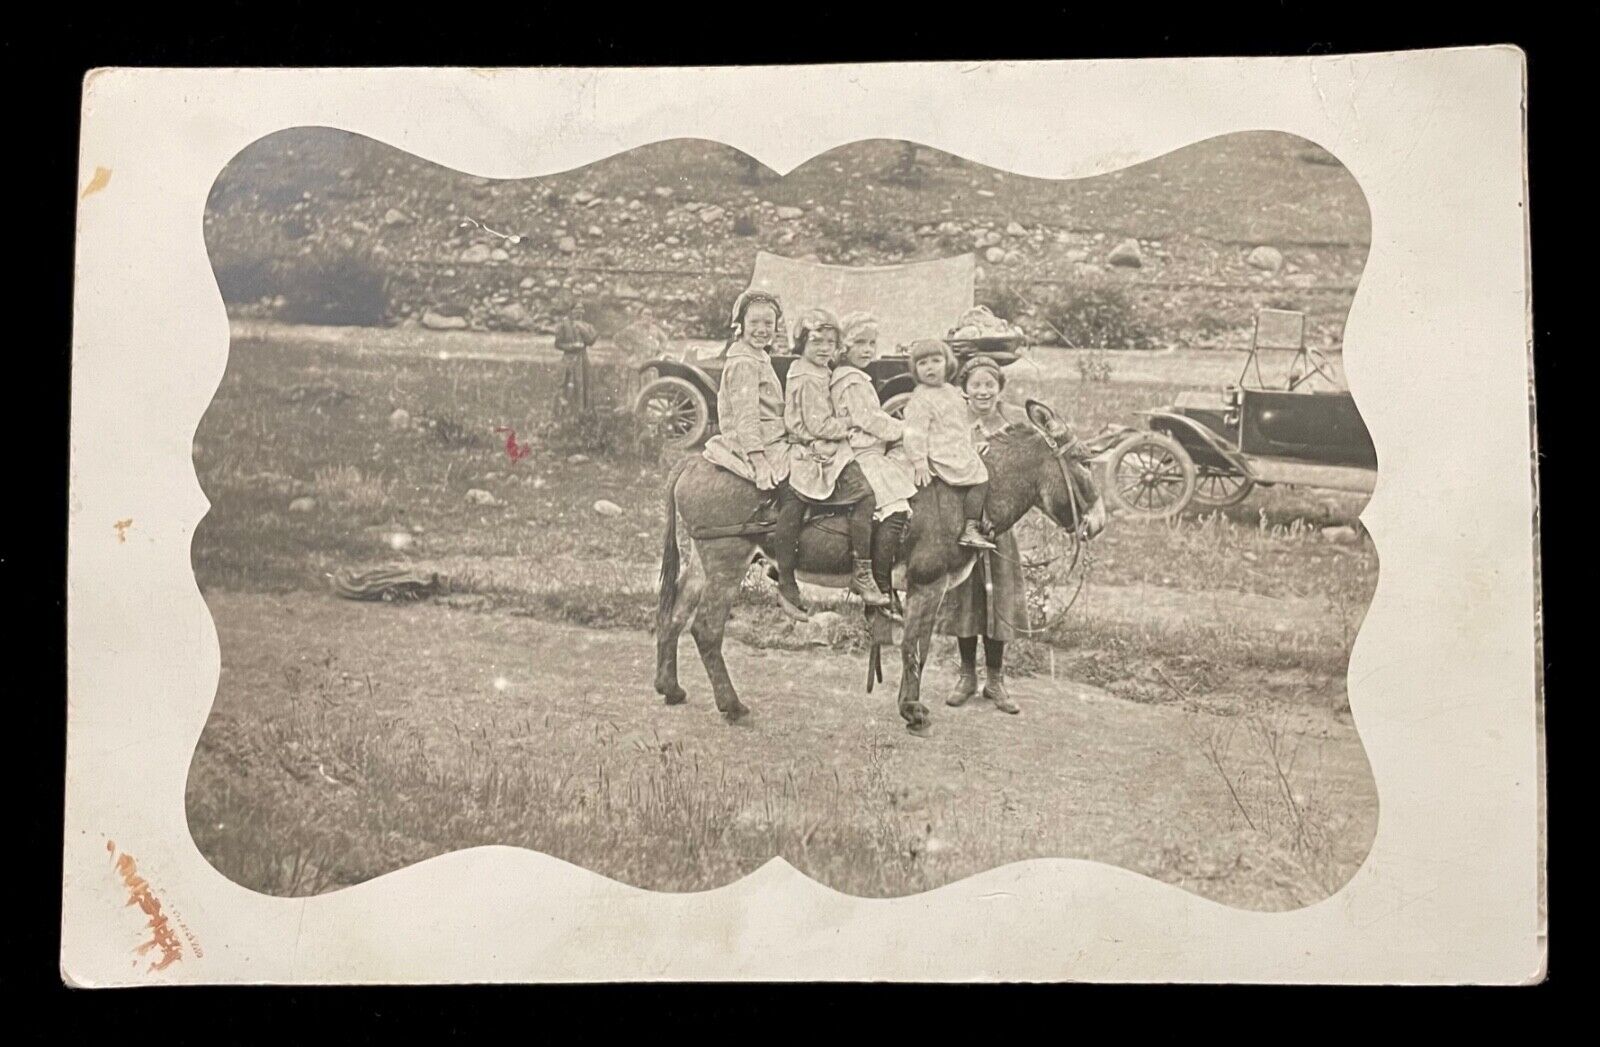 CHILDREN PILED ON DONKEY  ROADSIDE ATTRACTION  RPPC  1910s   CUTE